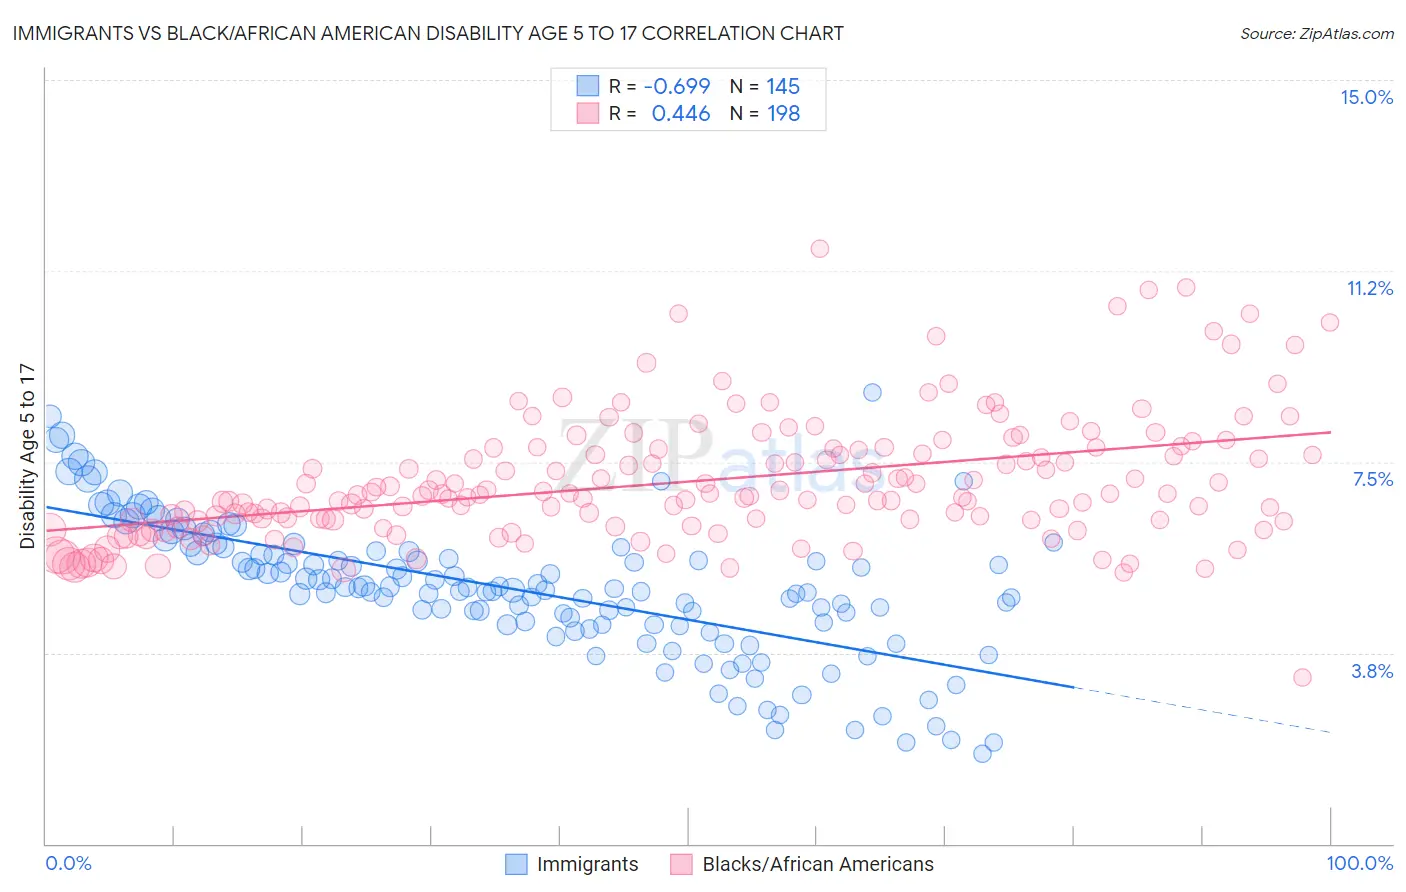 Immigrants vs Black/African American Disability Age 5 to 17